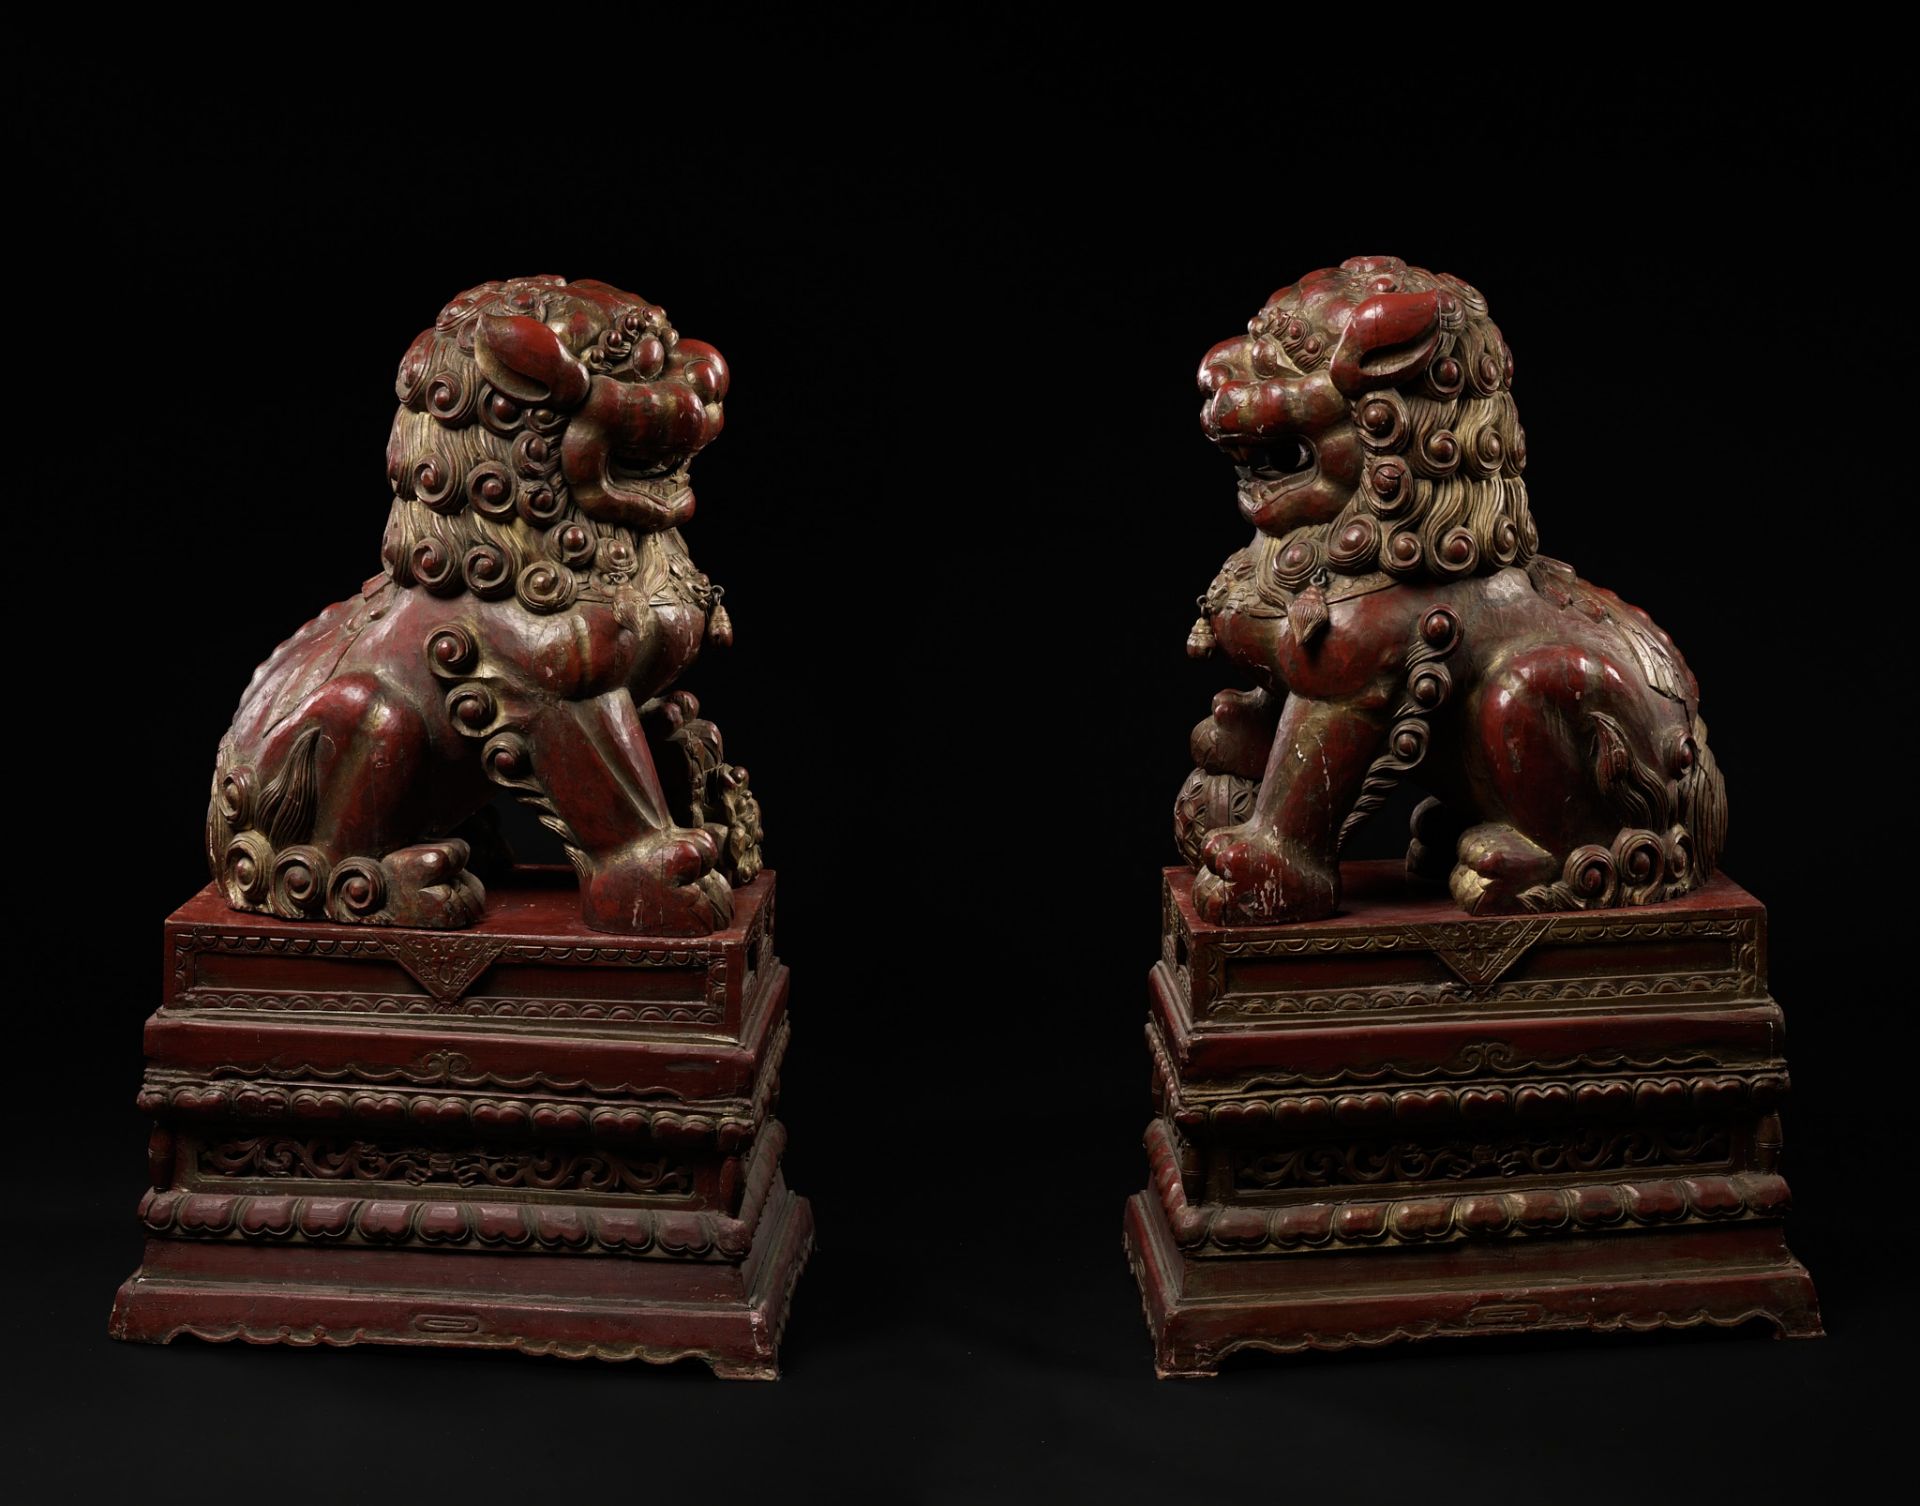 A PAIR OF MONUMENTAL GILT AND RED LACQUERED WOOD FIGURES OF BUDDHIST LIONS, LATE QING DYNASTY - Image 7 of 9